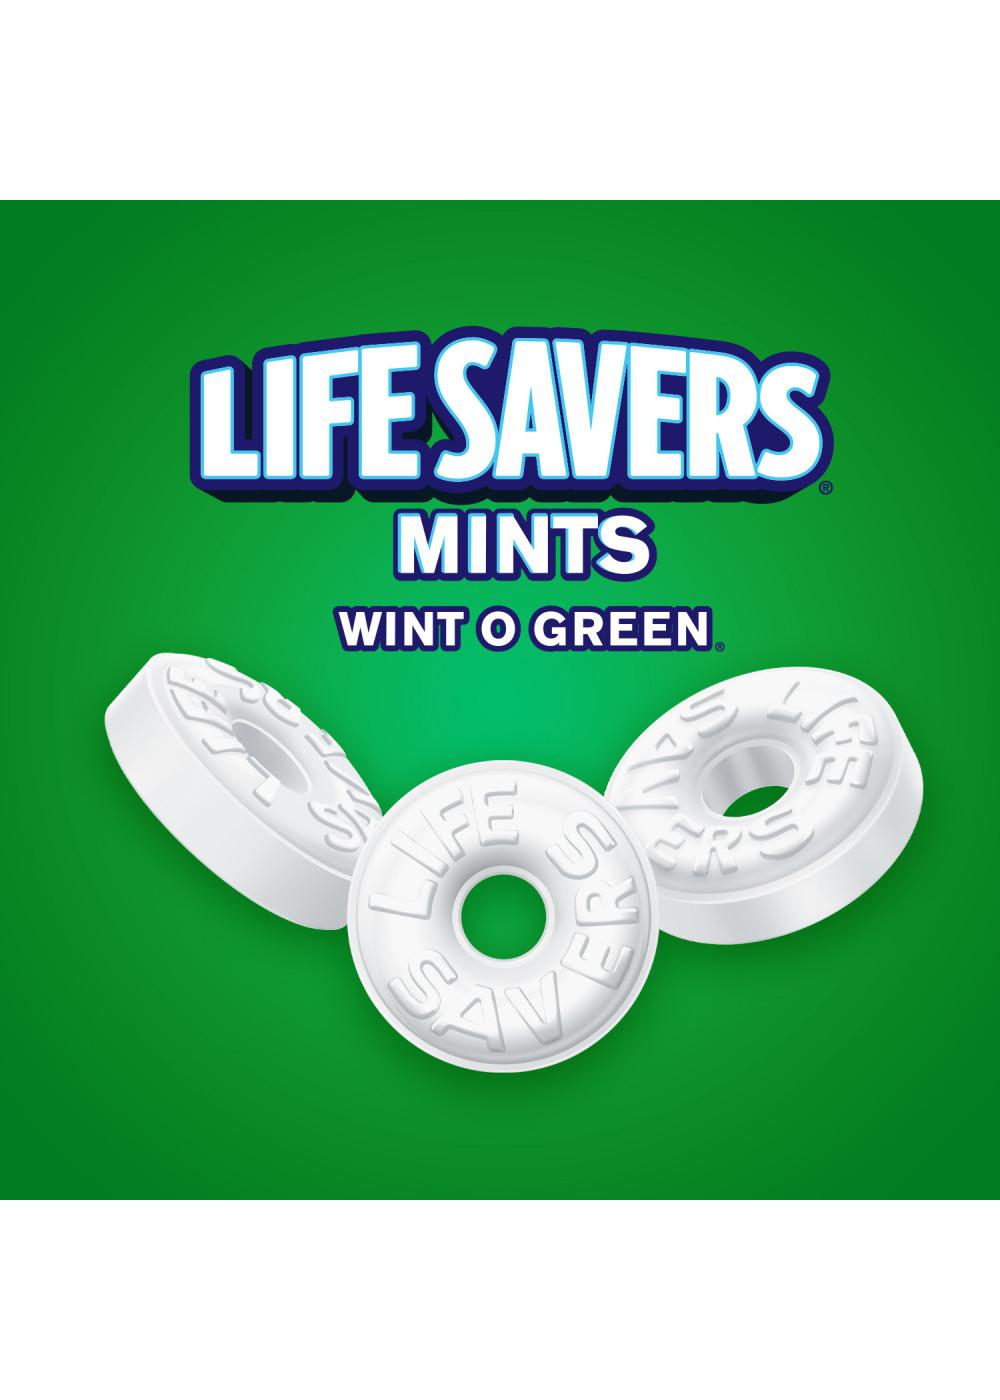 Life Savers Wint-O-Green Breath Mints; image 6 of 8